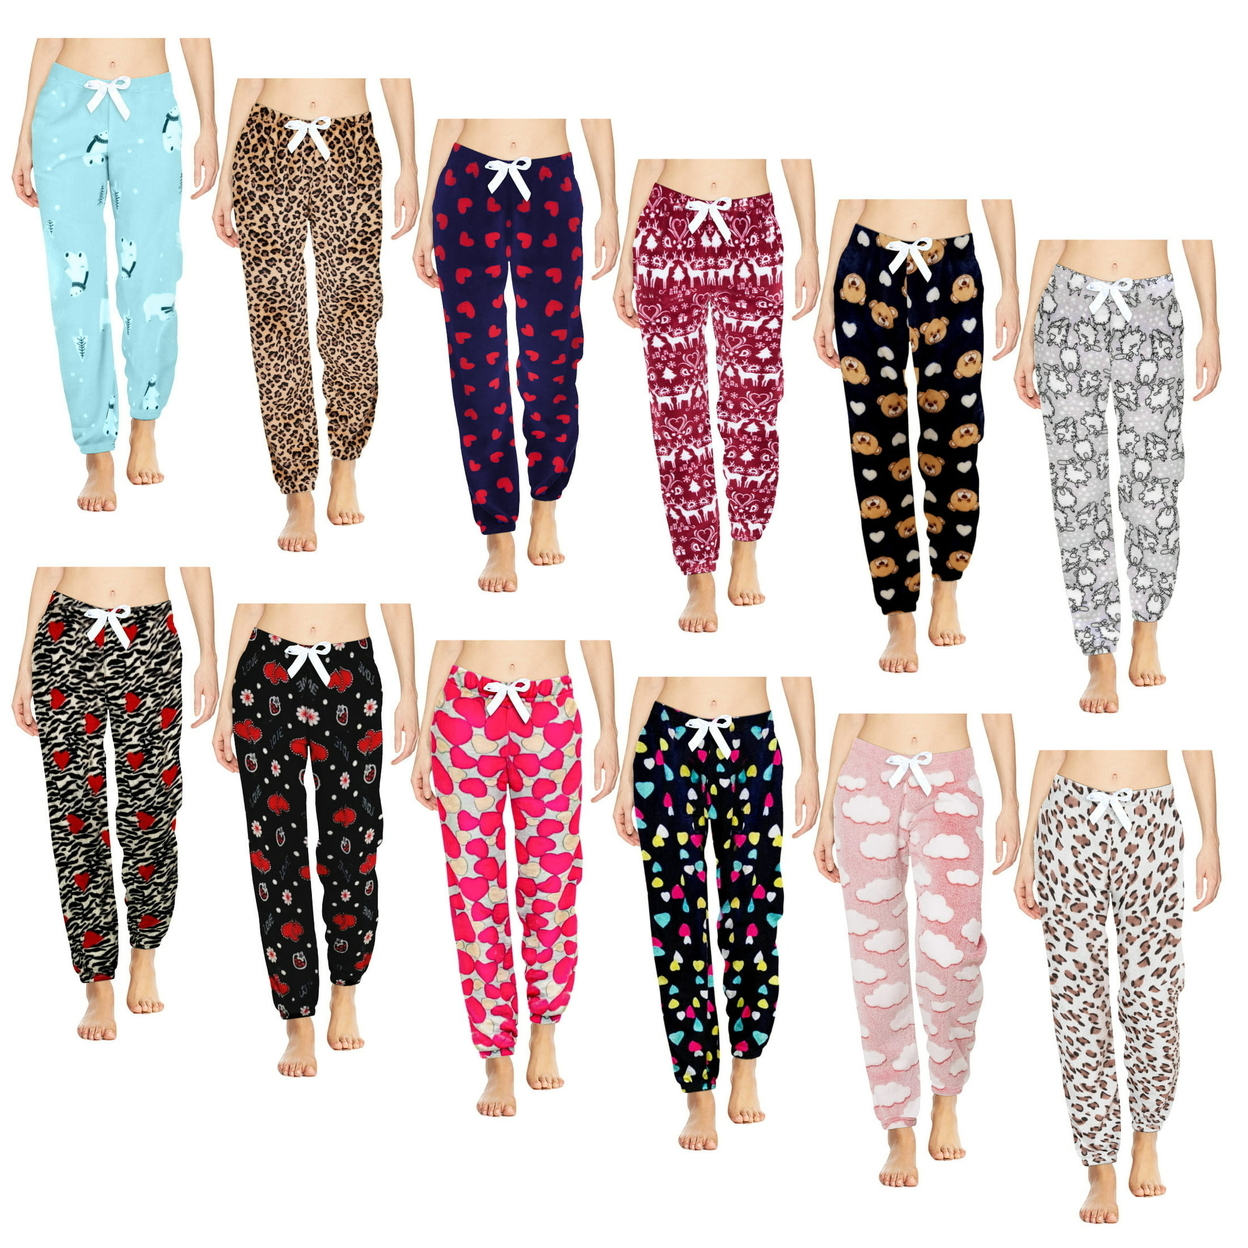 Multi-Pack: Women's Printed Ultra-Soft Comfy Stretch Micro-Fleece Pajama Lounge Pants - 3-pack, Love, Xx-large